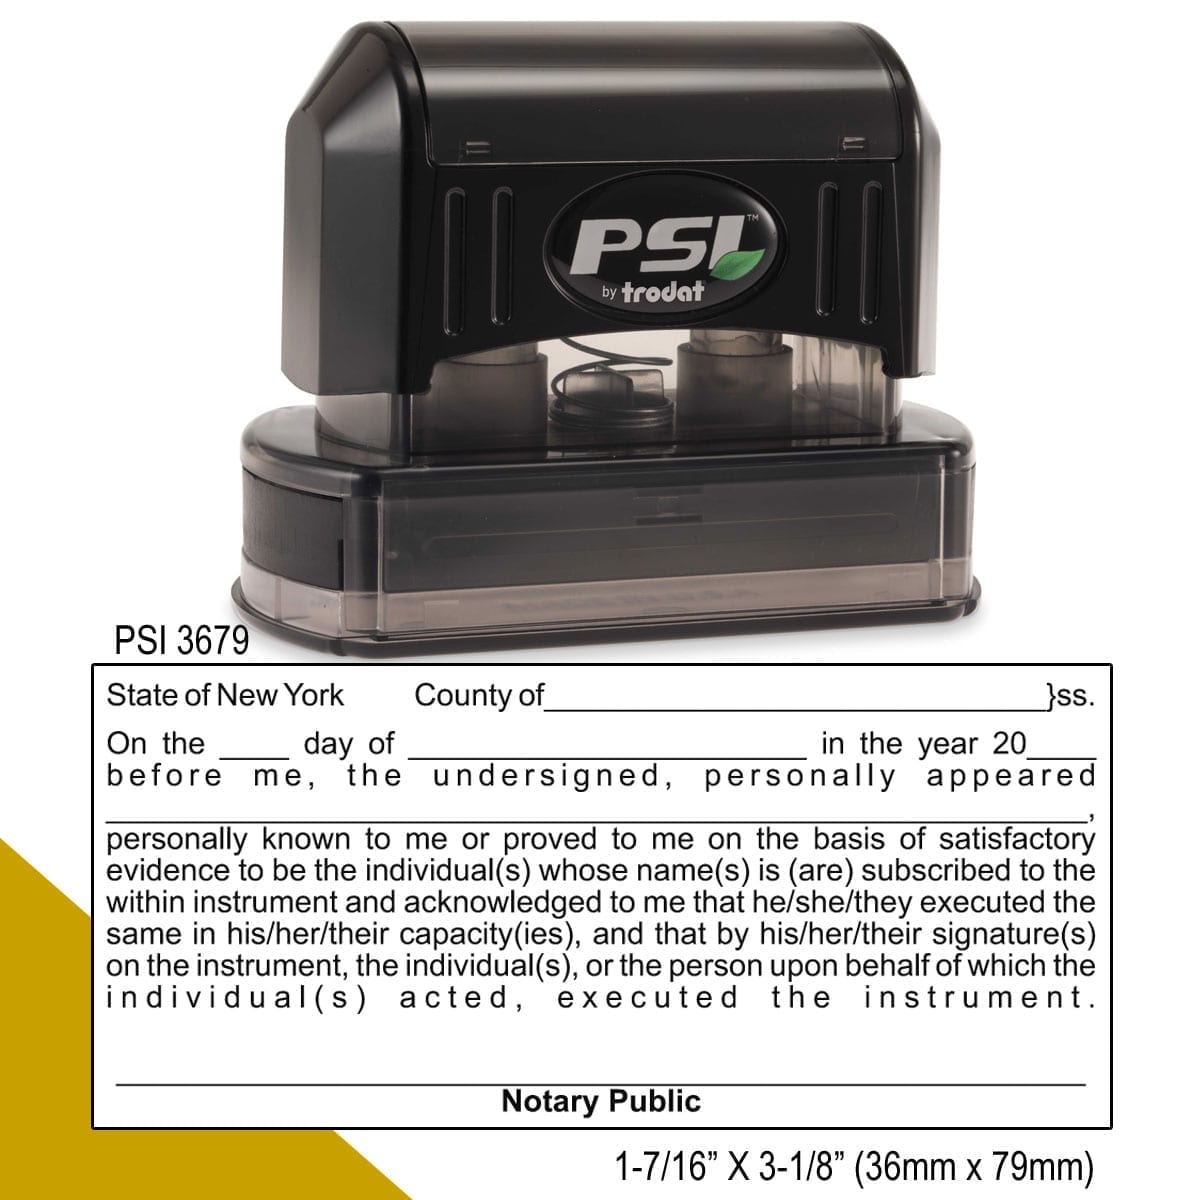 New York Notary Public Self-Inking Stamp